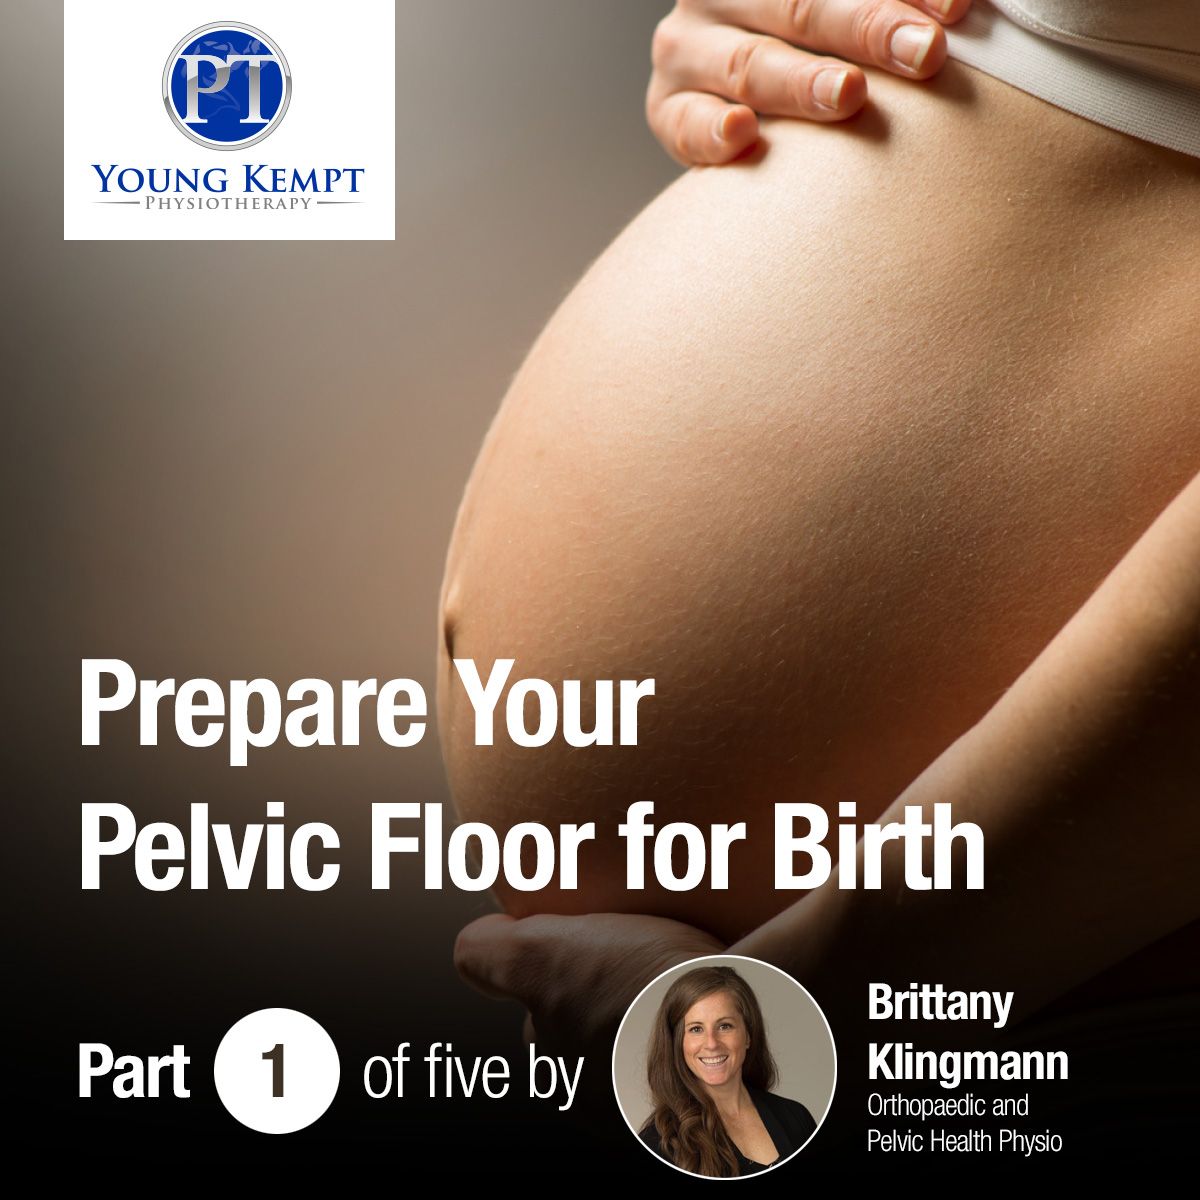 Prepare Your Pelvic Floor for Birth: An Introduction